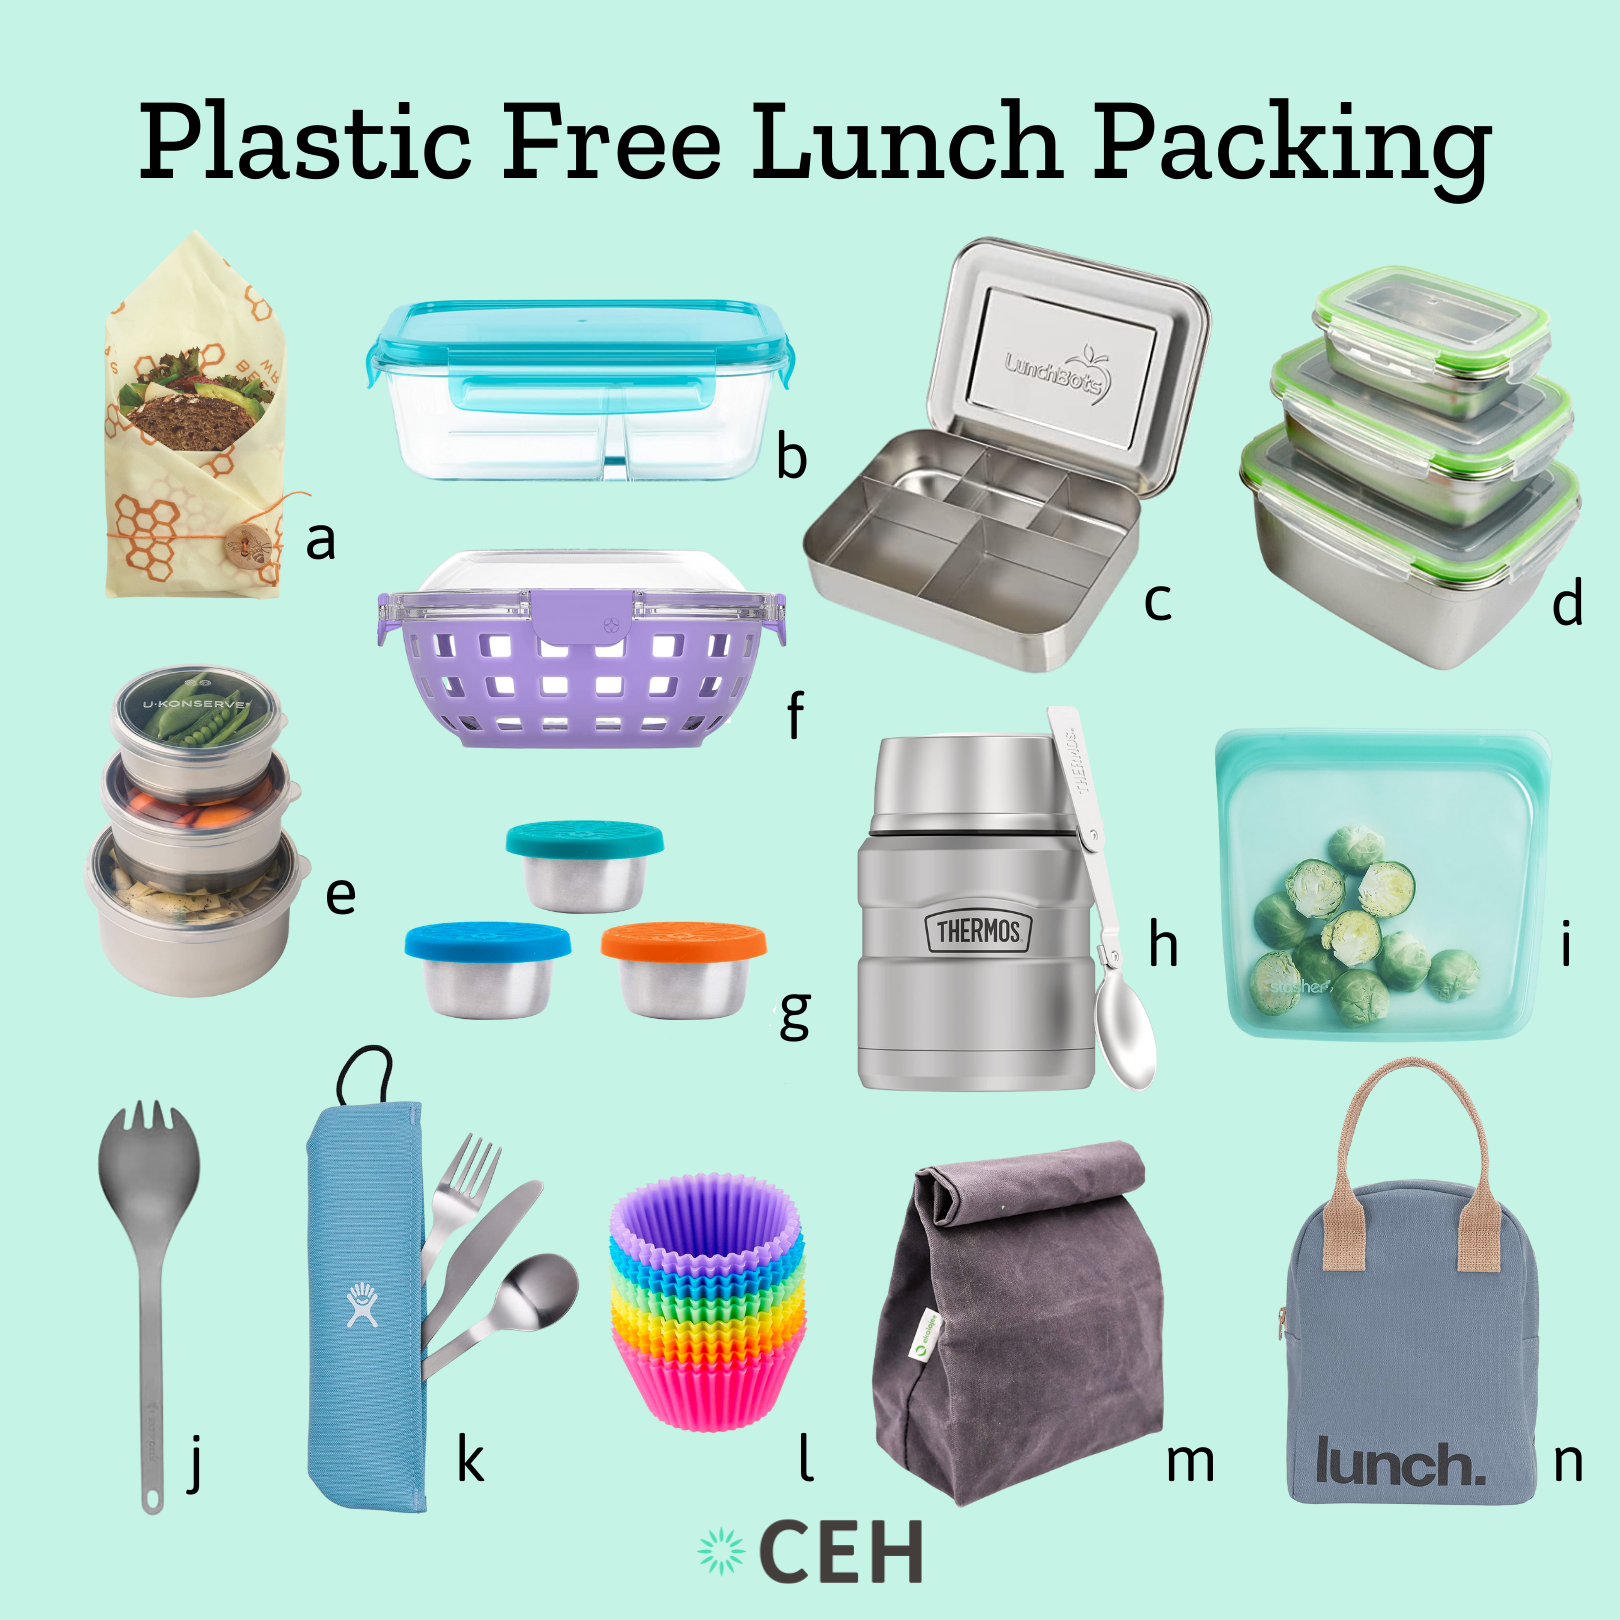 14 Essentials for Packing a Plastic Free Lunch - Center for